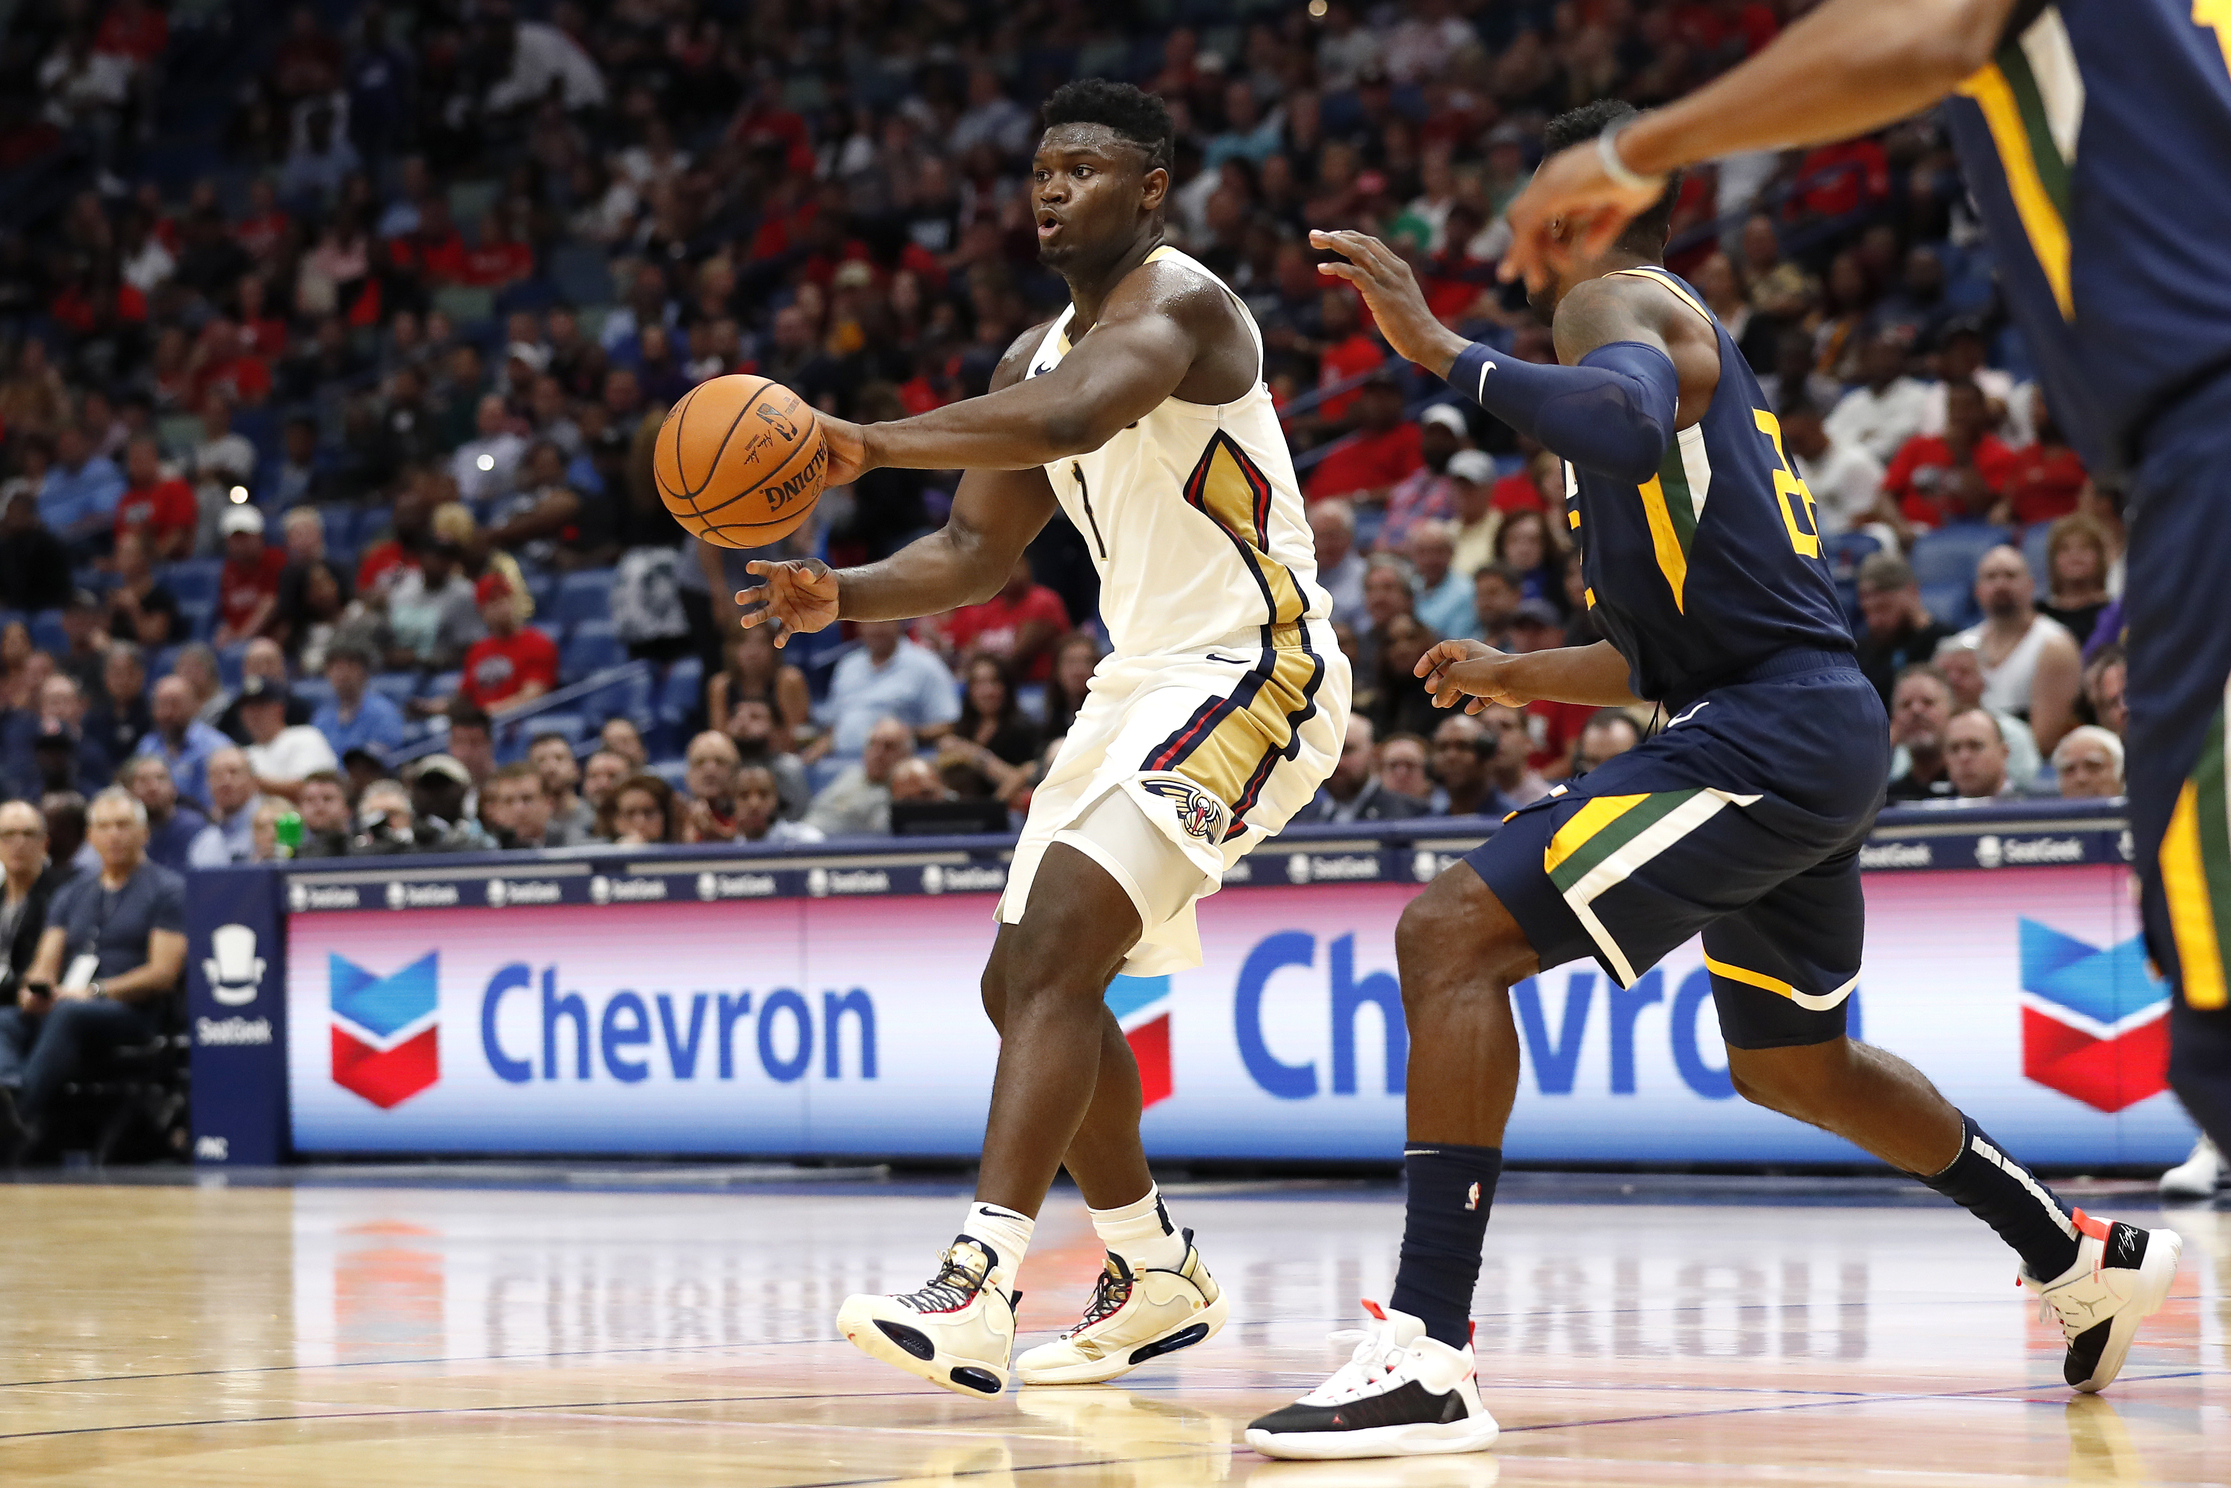 Williamson wows home crowd, Pelicans beat Jazz 128-127